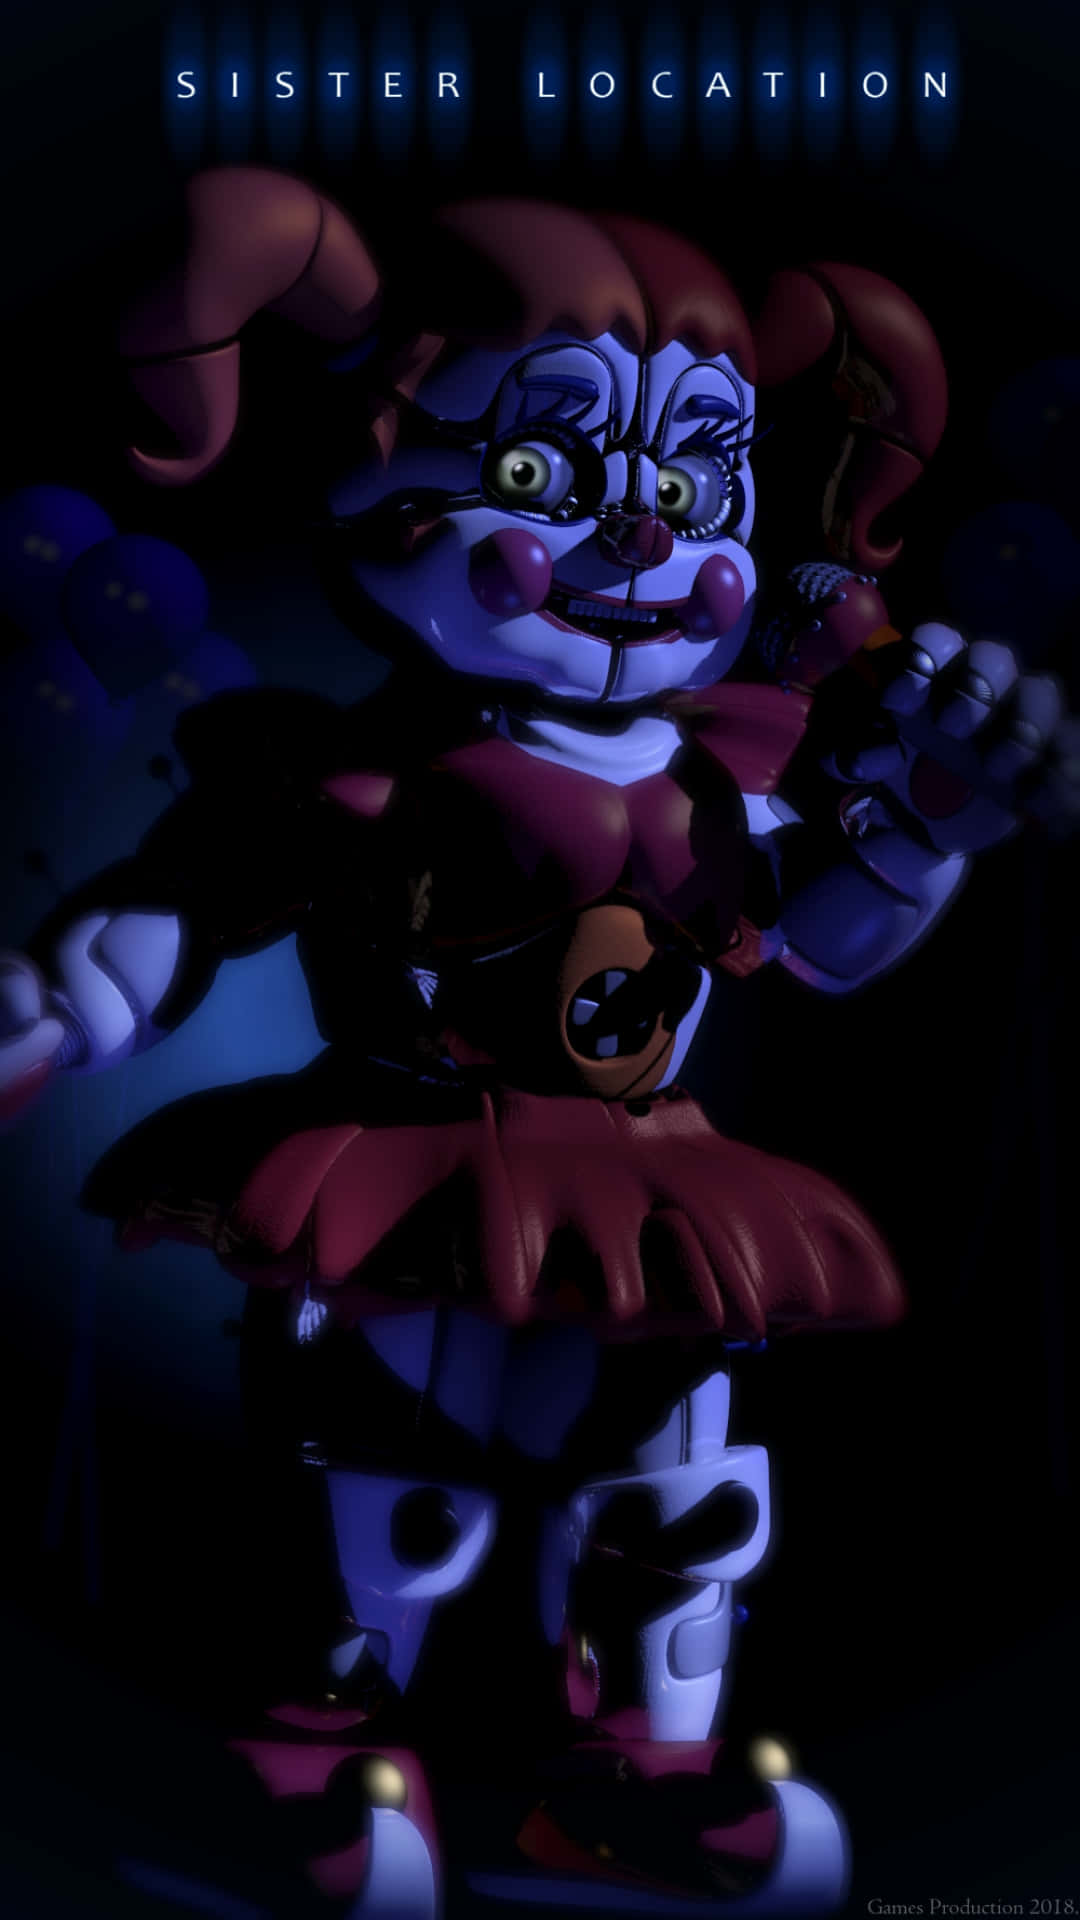 Five Nights At Freddy's: Sister Location In Darkness Wallpaper